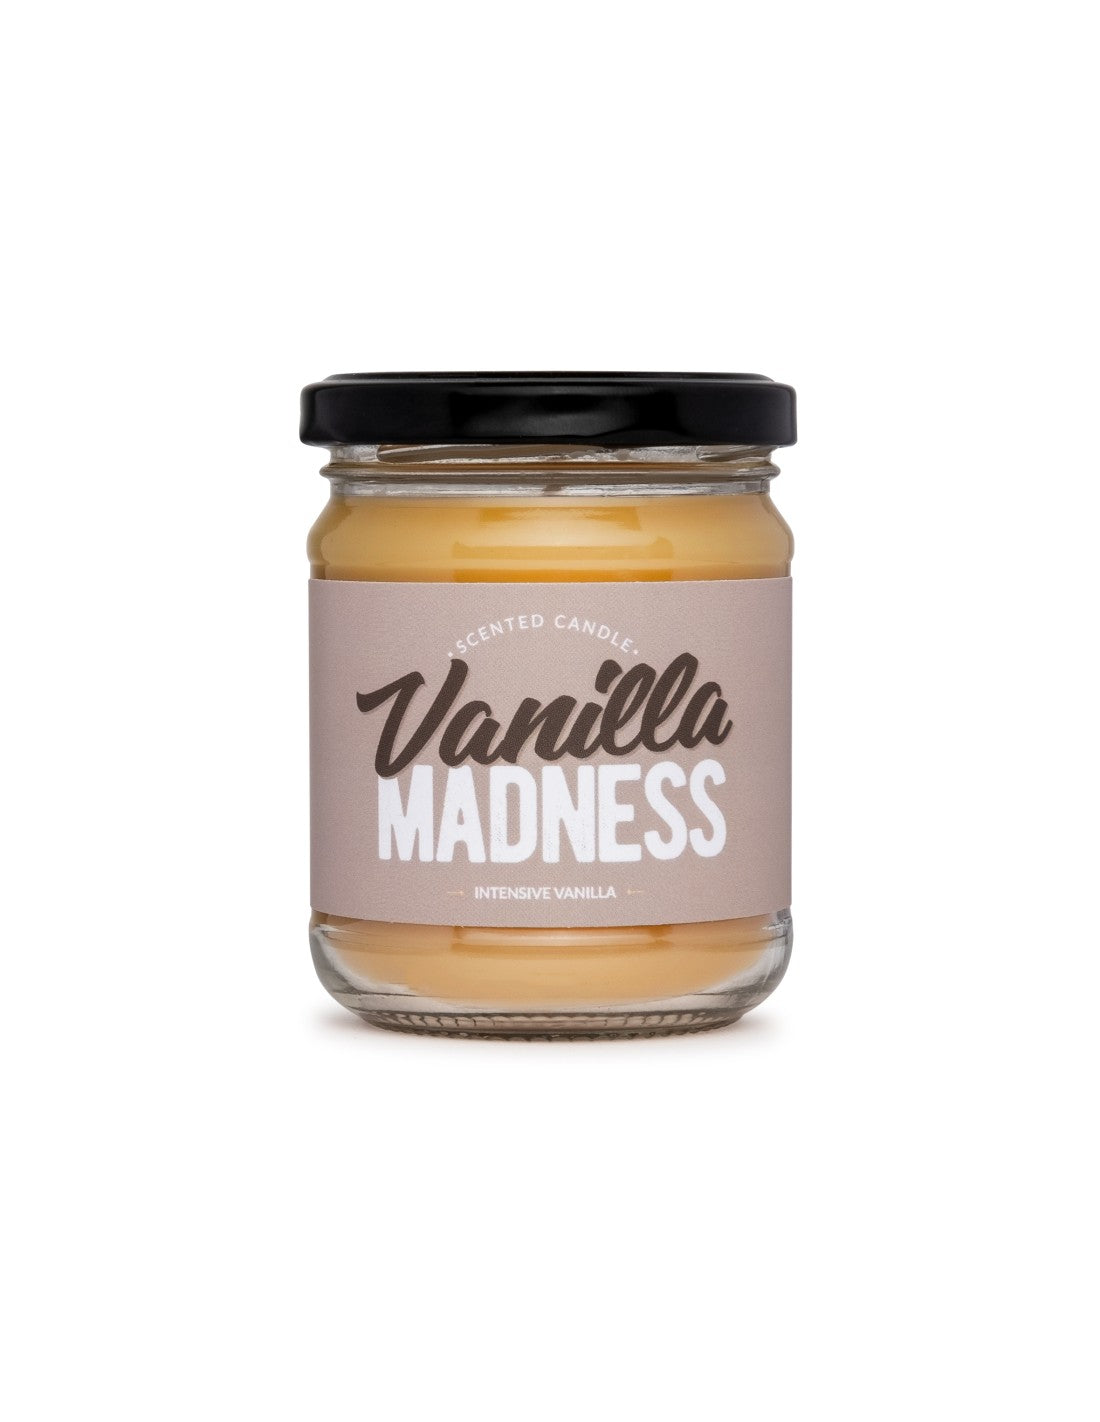 Beeswax Candle "Vanilla Madness"